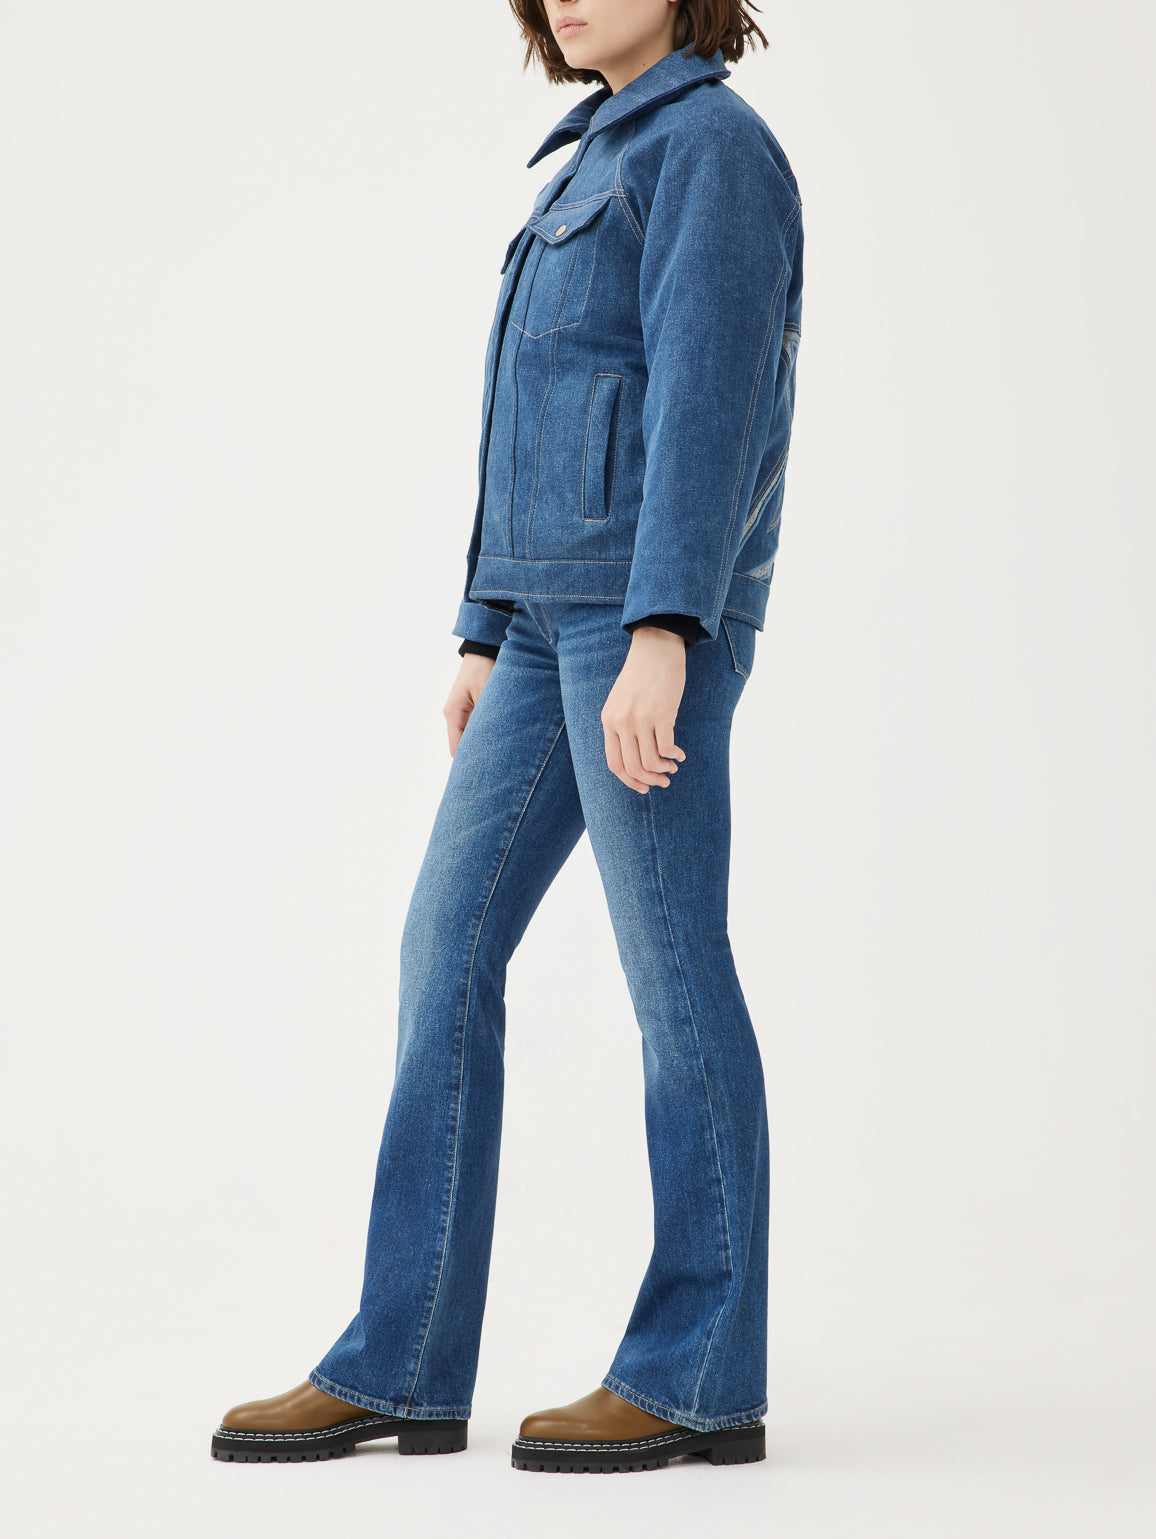 DL1961 Collection Denim — Outfits Skiwear Perfect 2022 Moment and Ski Denim Launch Sustainable